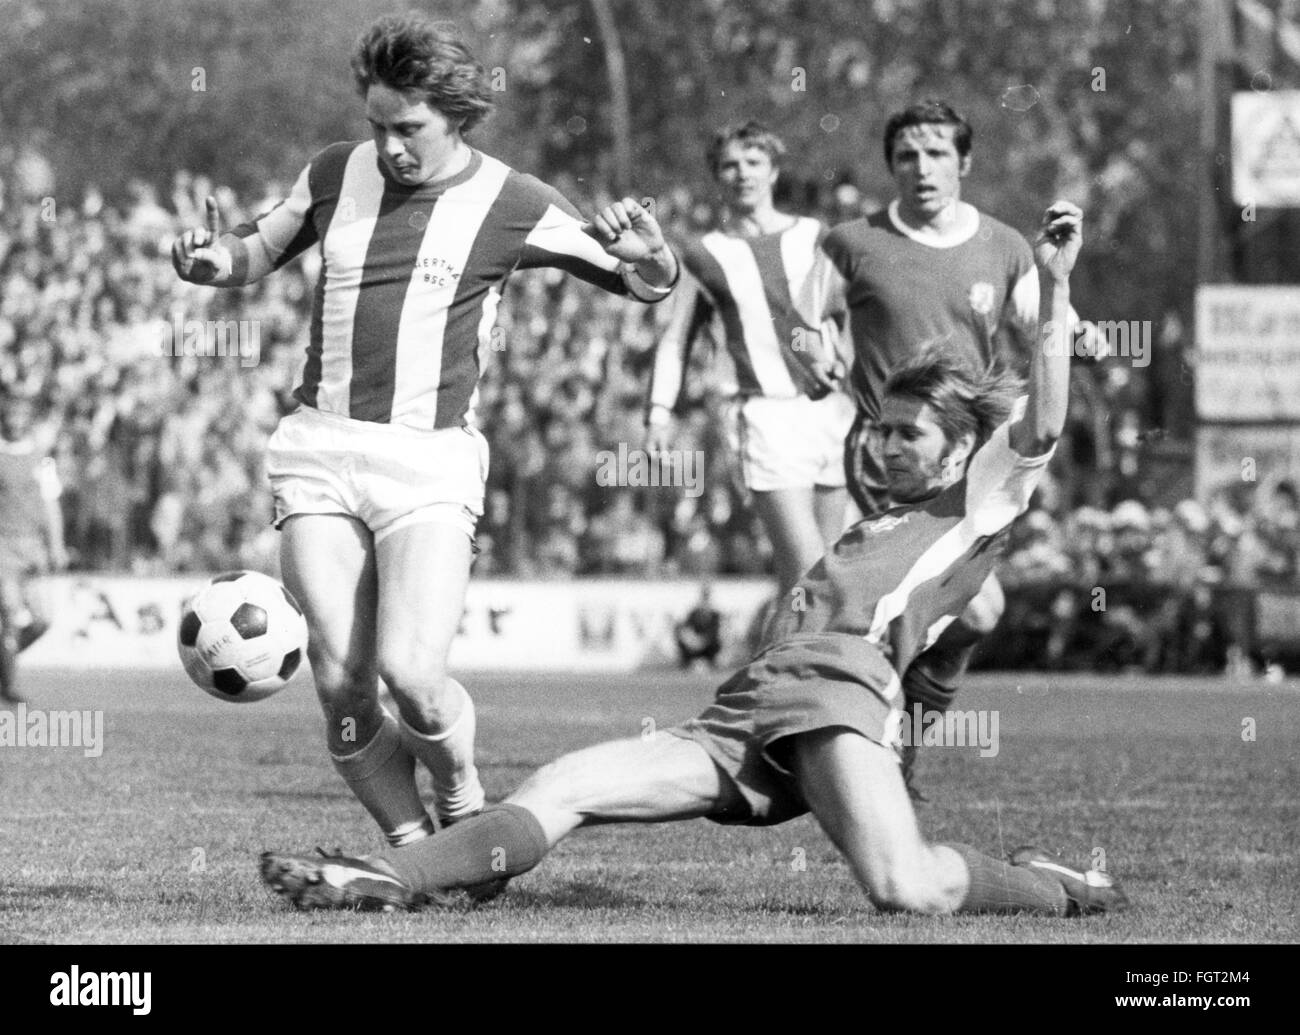 sports,football,games,Germany,national league,season 1970 / 1971,29th match day,game Rot-Weiss Essen versus Hertha BSC(0:3),Georg-Melches-Stadion,Essen,1.5.1971,defender Peter Czernotzky(Essen)stops striker Arno Steffenhagen(Berlin),Rot Weiss,football match,soccer match,football matches,footballer,footballers,kicker,football player,football players,action,act,actions,acts,assaults,assault,attack,offensive move,attacks,offensive moves,defences,defenses,defense,defence,leg lay,sliding tackle,running,run,runs,ball,playi,Additional-Rights-Clearences-Not Available Stock Photo